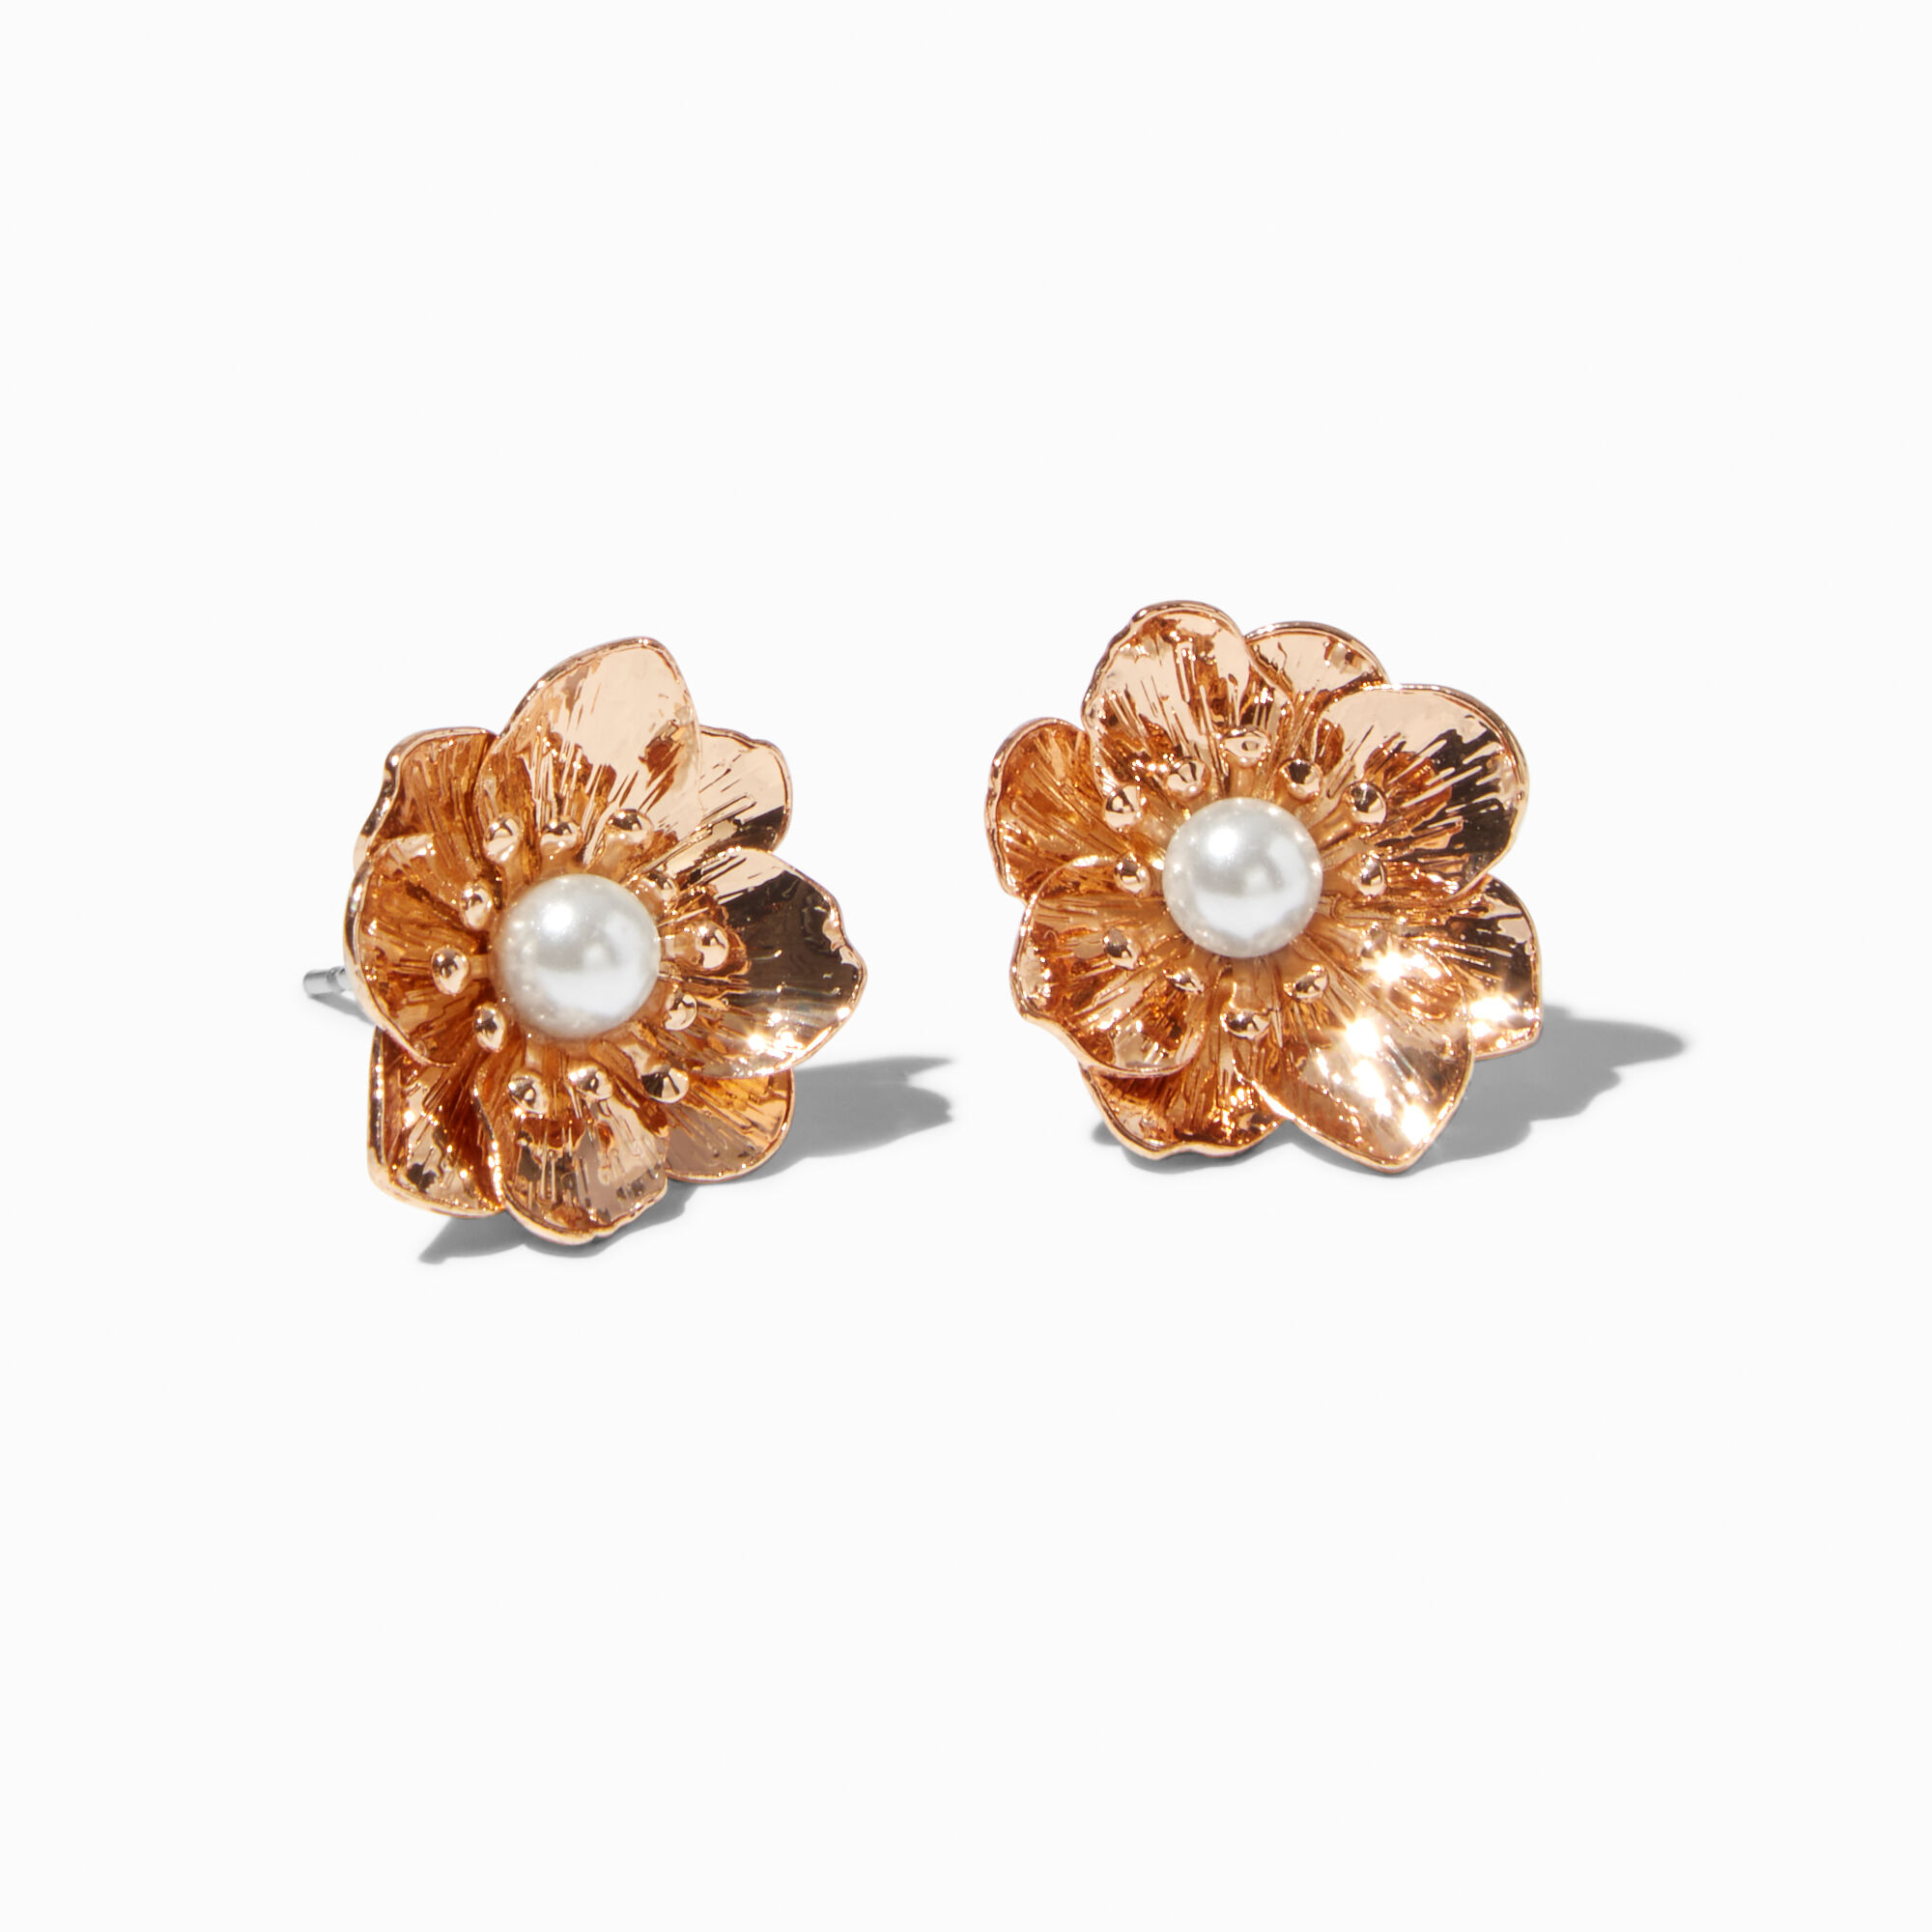 View Claires Tone Pearl Flower Stud Earrings Gold information